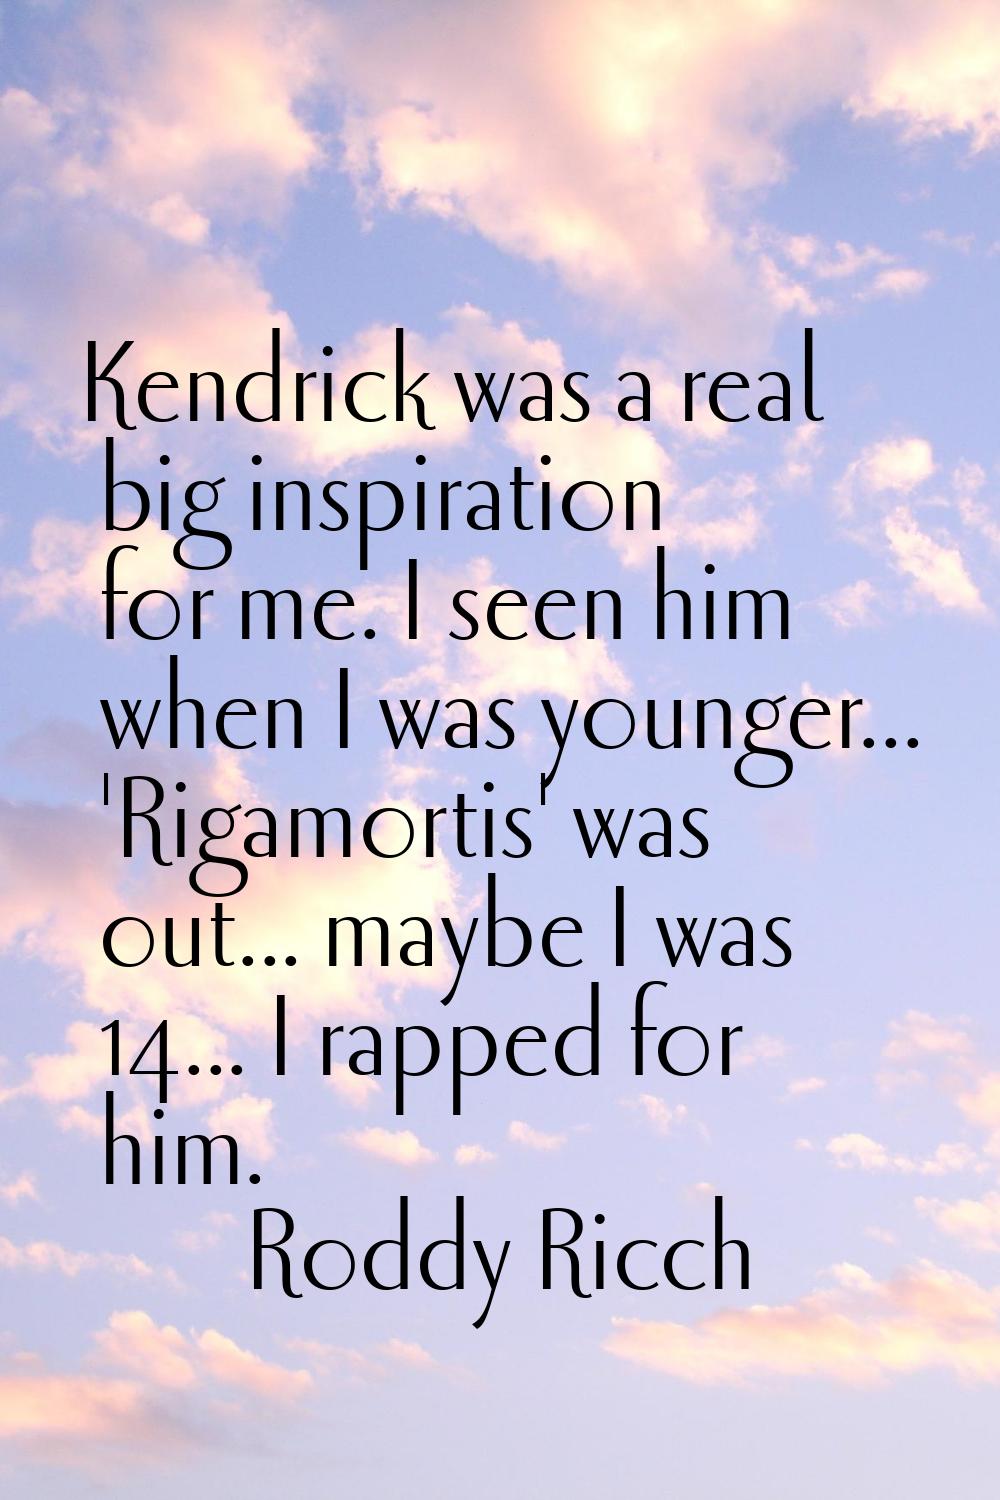 Kendrick was a real big inspiration for me. I seen him when I was younger... 'Rigamortis' was out..